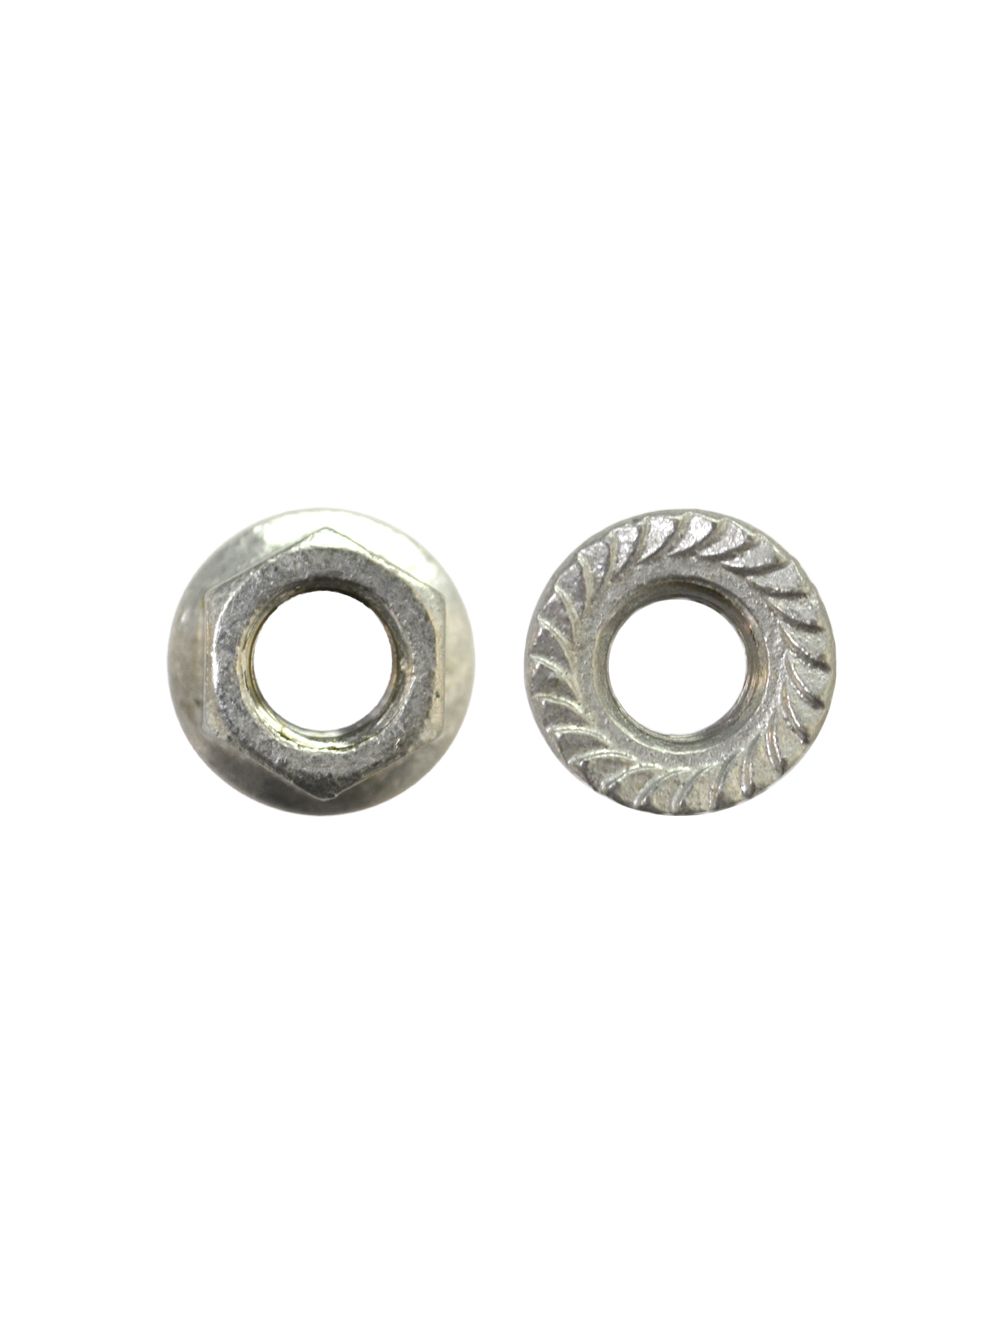 1/4-20 Stainless Steel Flange Nuts Serrated Base Lock Anti Vibration Qty 250 